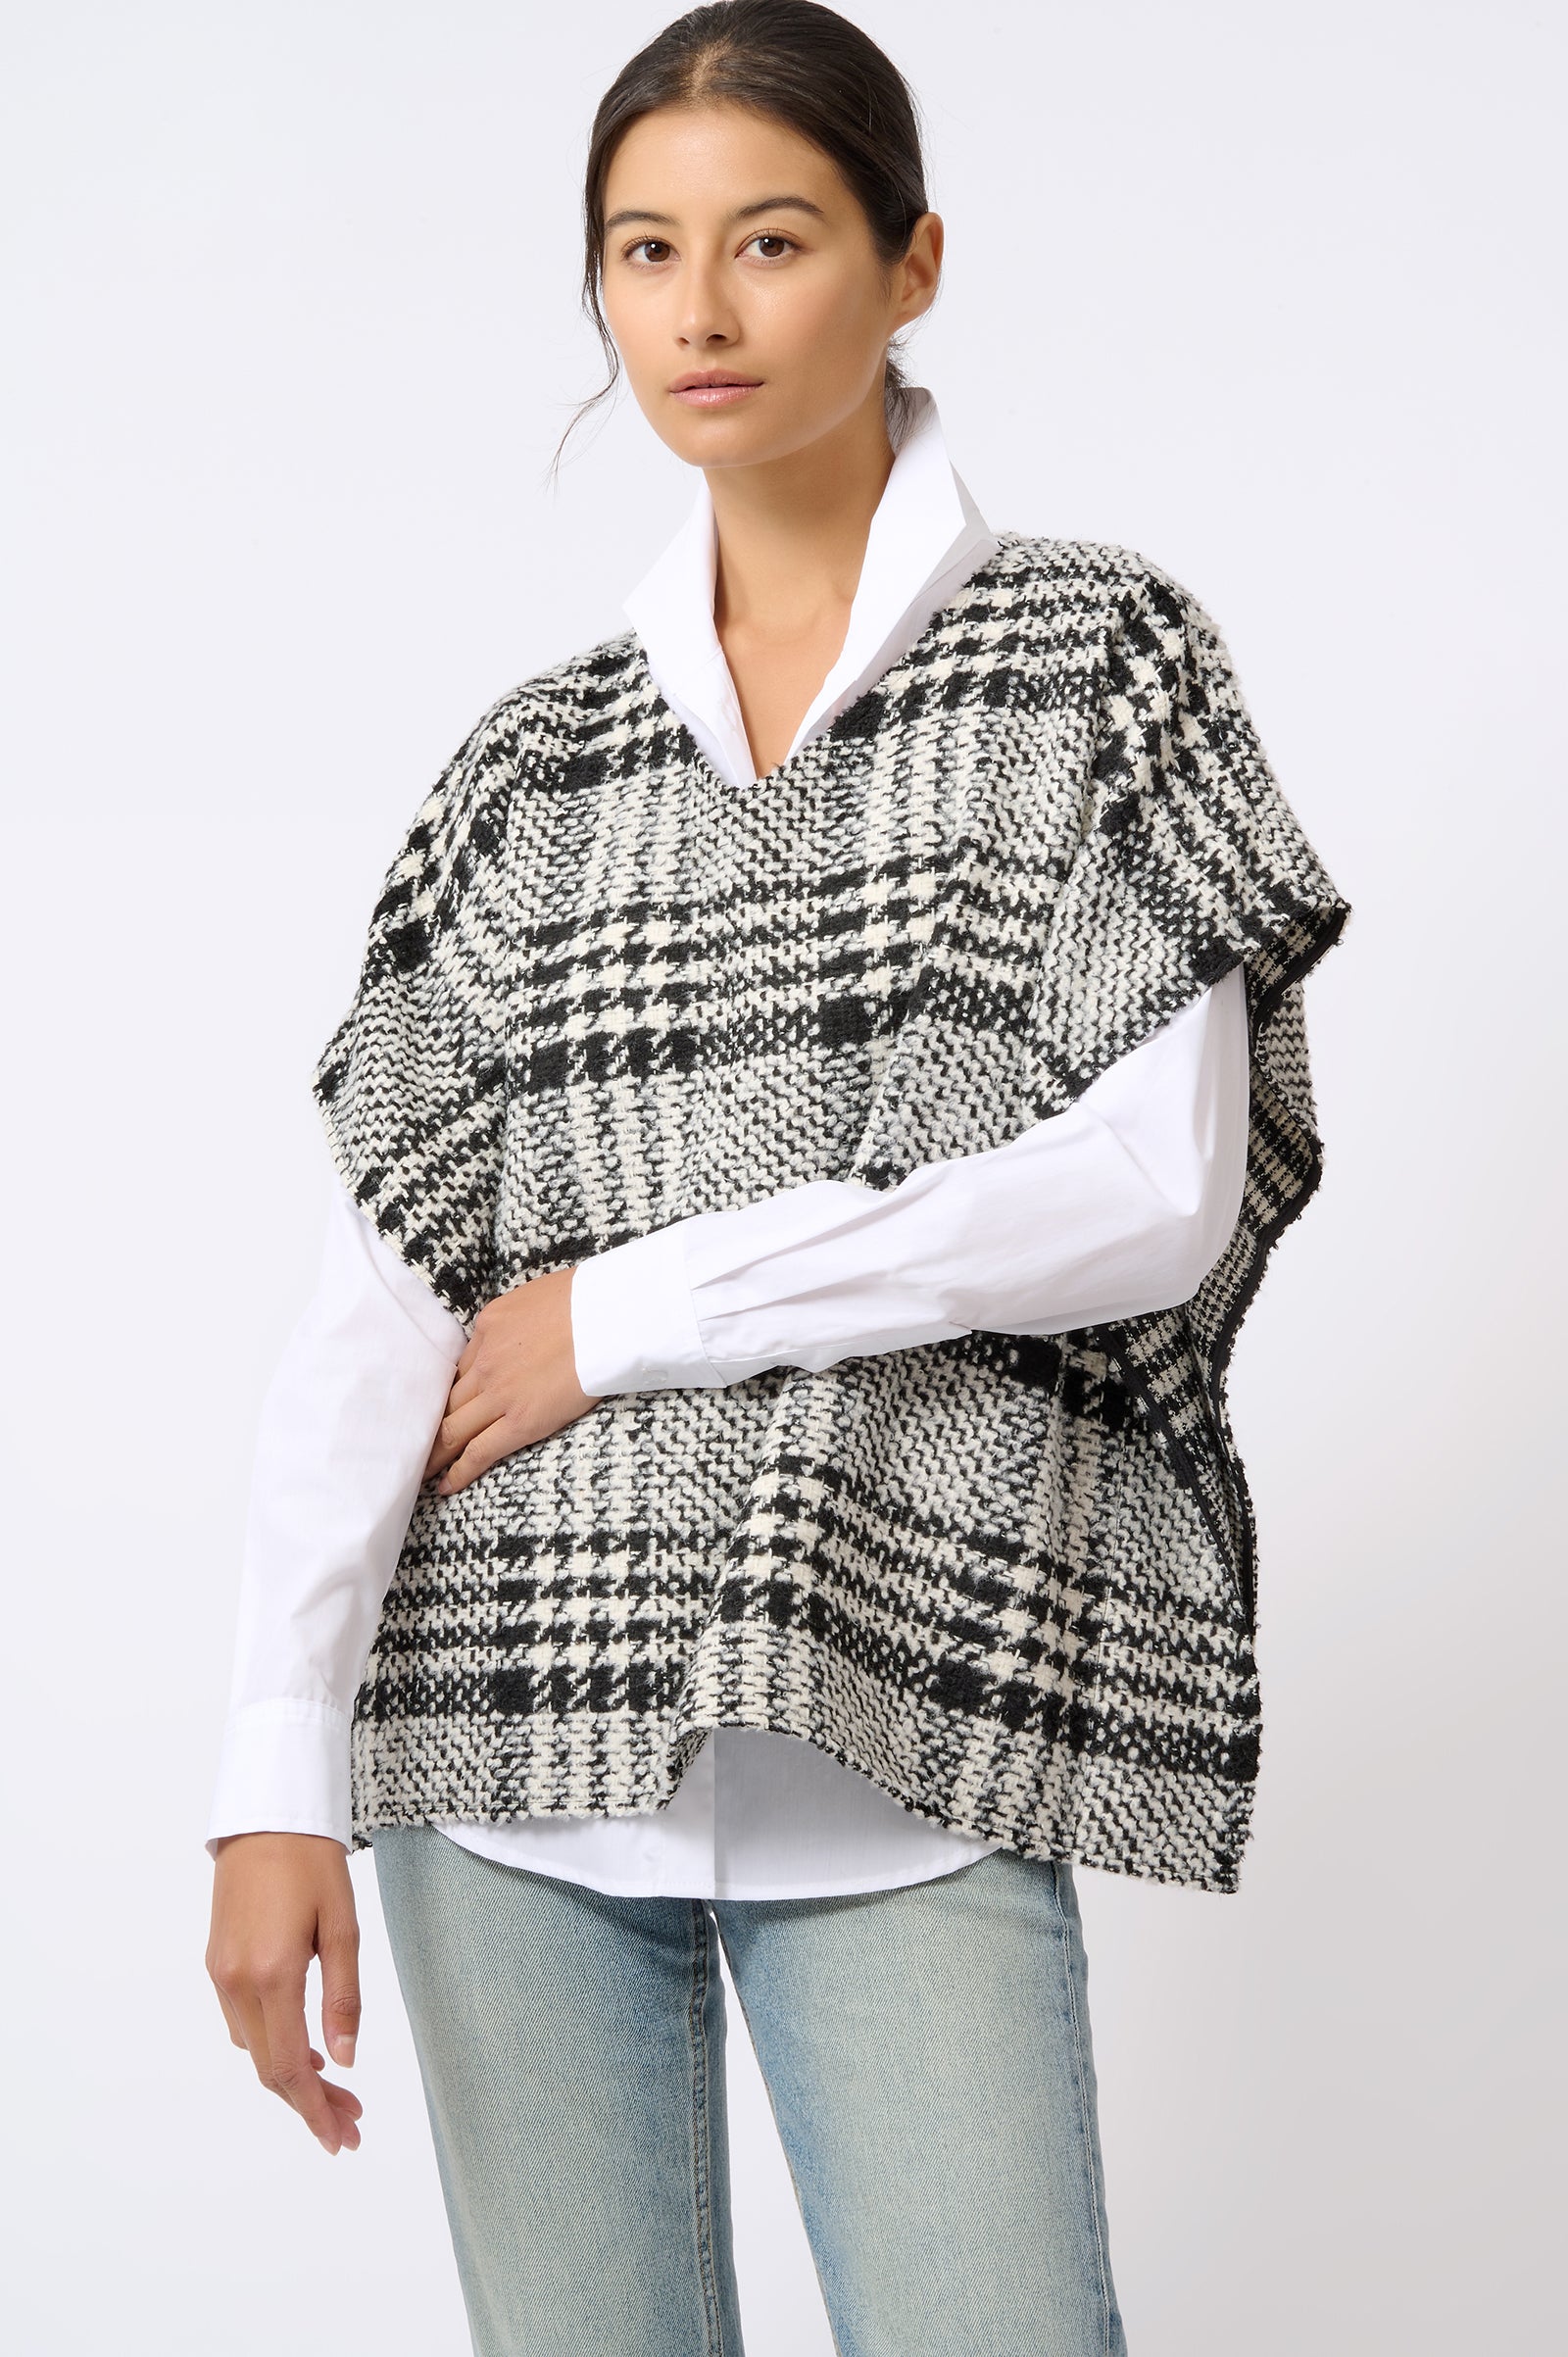 Kal Rieman Plaid Poncho in Black and White Plaid on Model with Arm Crossed Front View